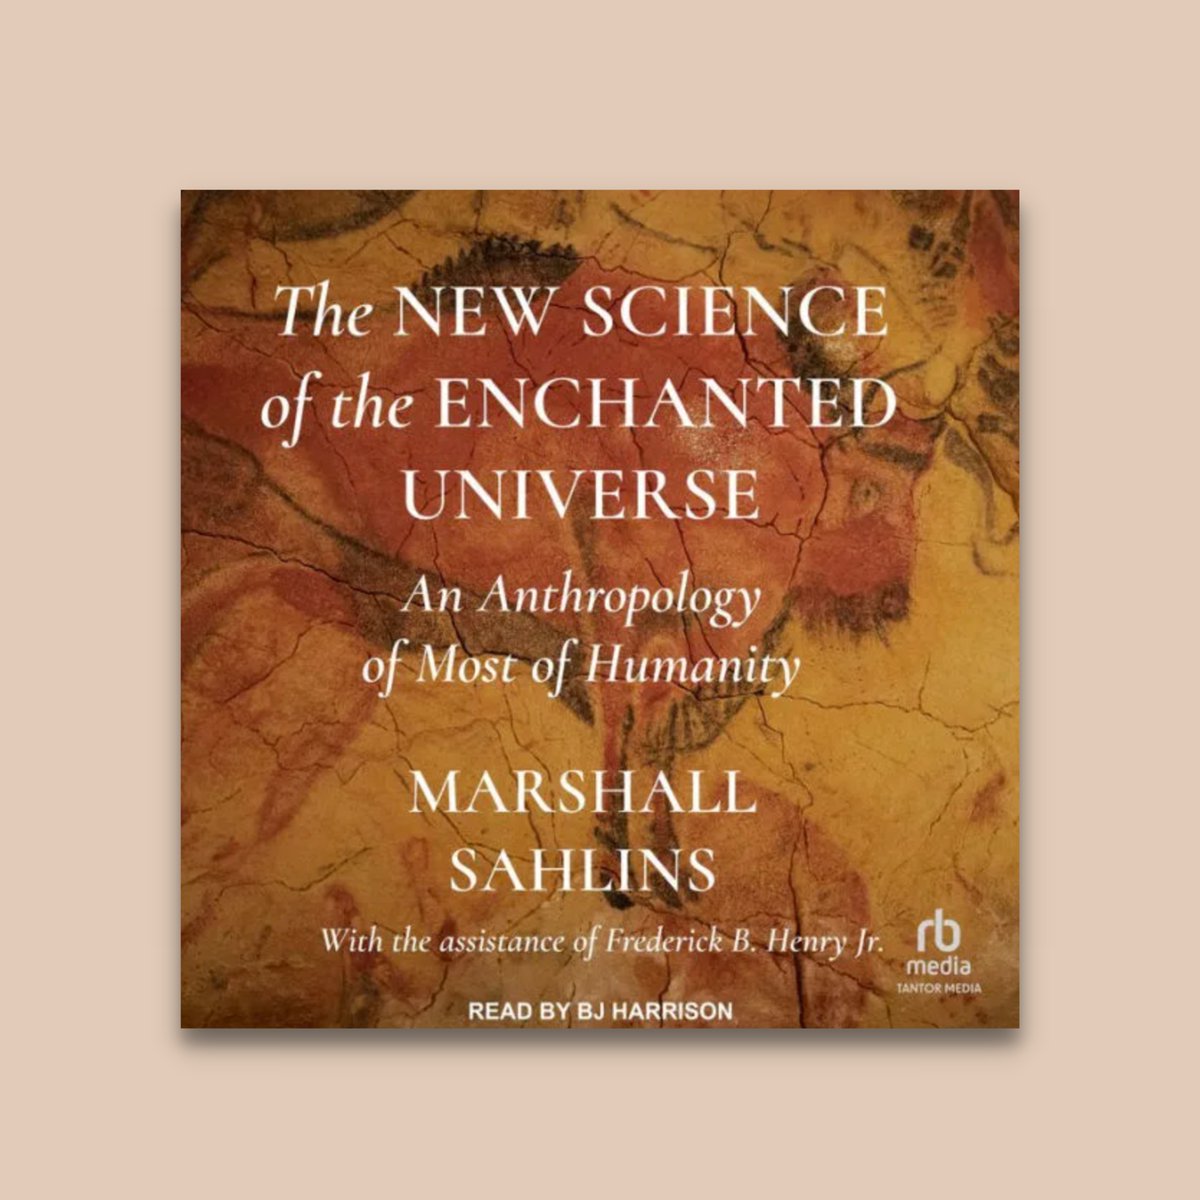 “The New Science of the Enchanted Universe is riveting, and this is in part because Sahlins writes with an incantatory, late-style openness to the existence of metapersons.” Read @annadella’s review of the late Marshall Sahlin’s book in @thenation hubs.ly/Q02nLnTC0